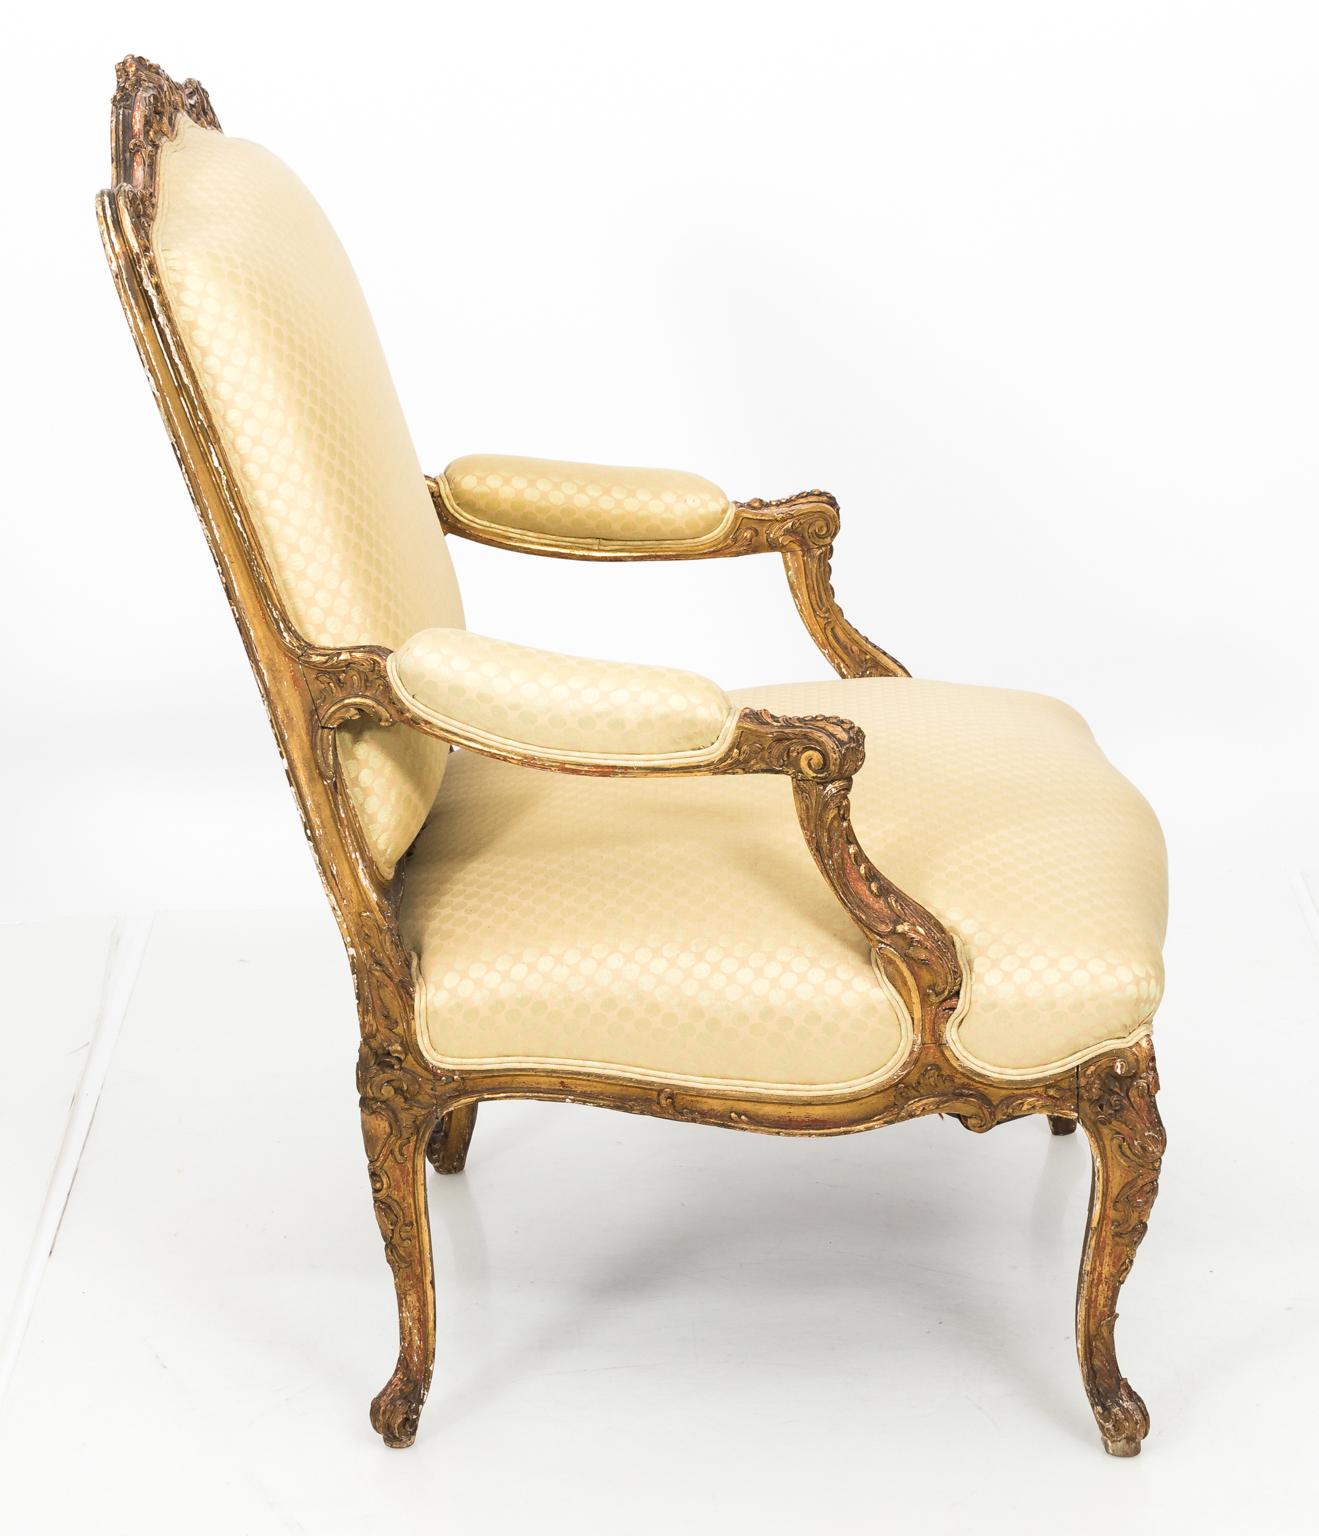 19th Century Giltwood Chaise Lounge Chair For Sale 15